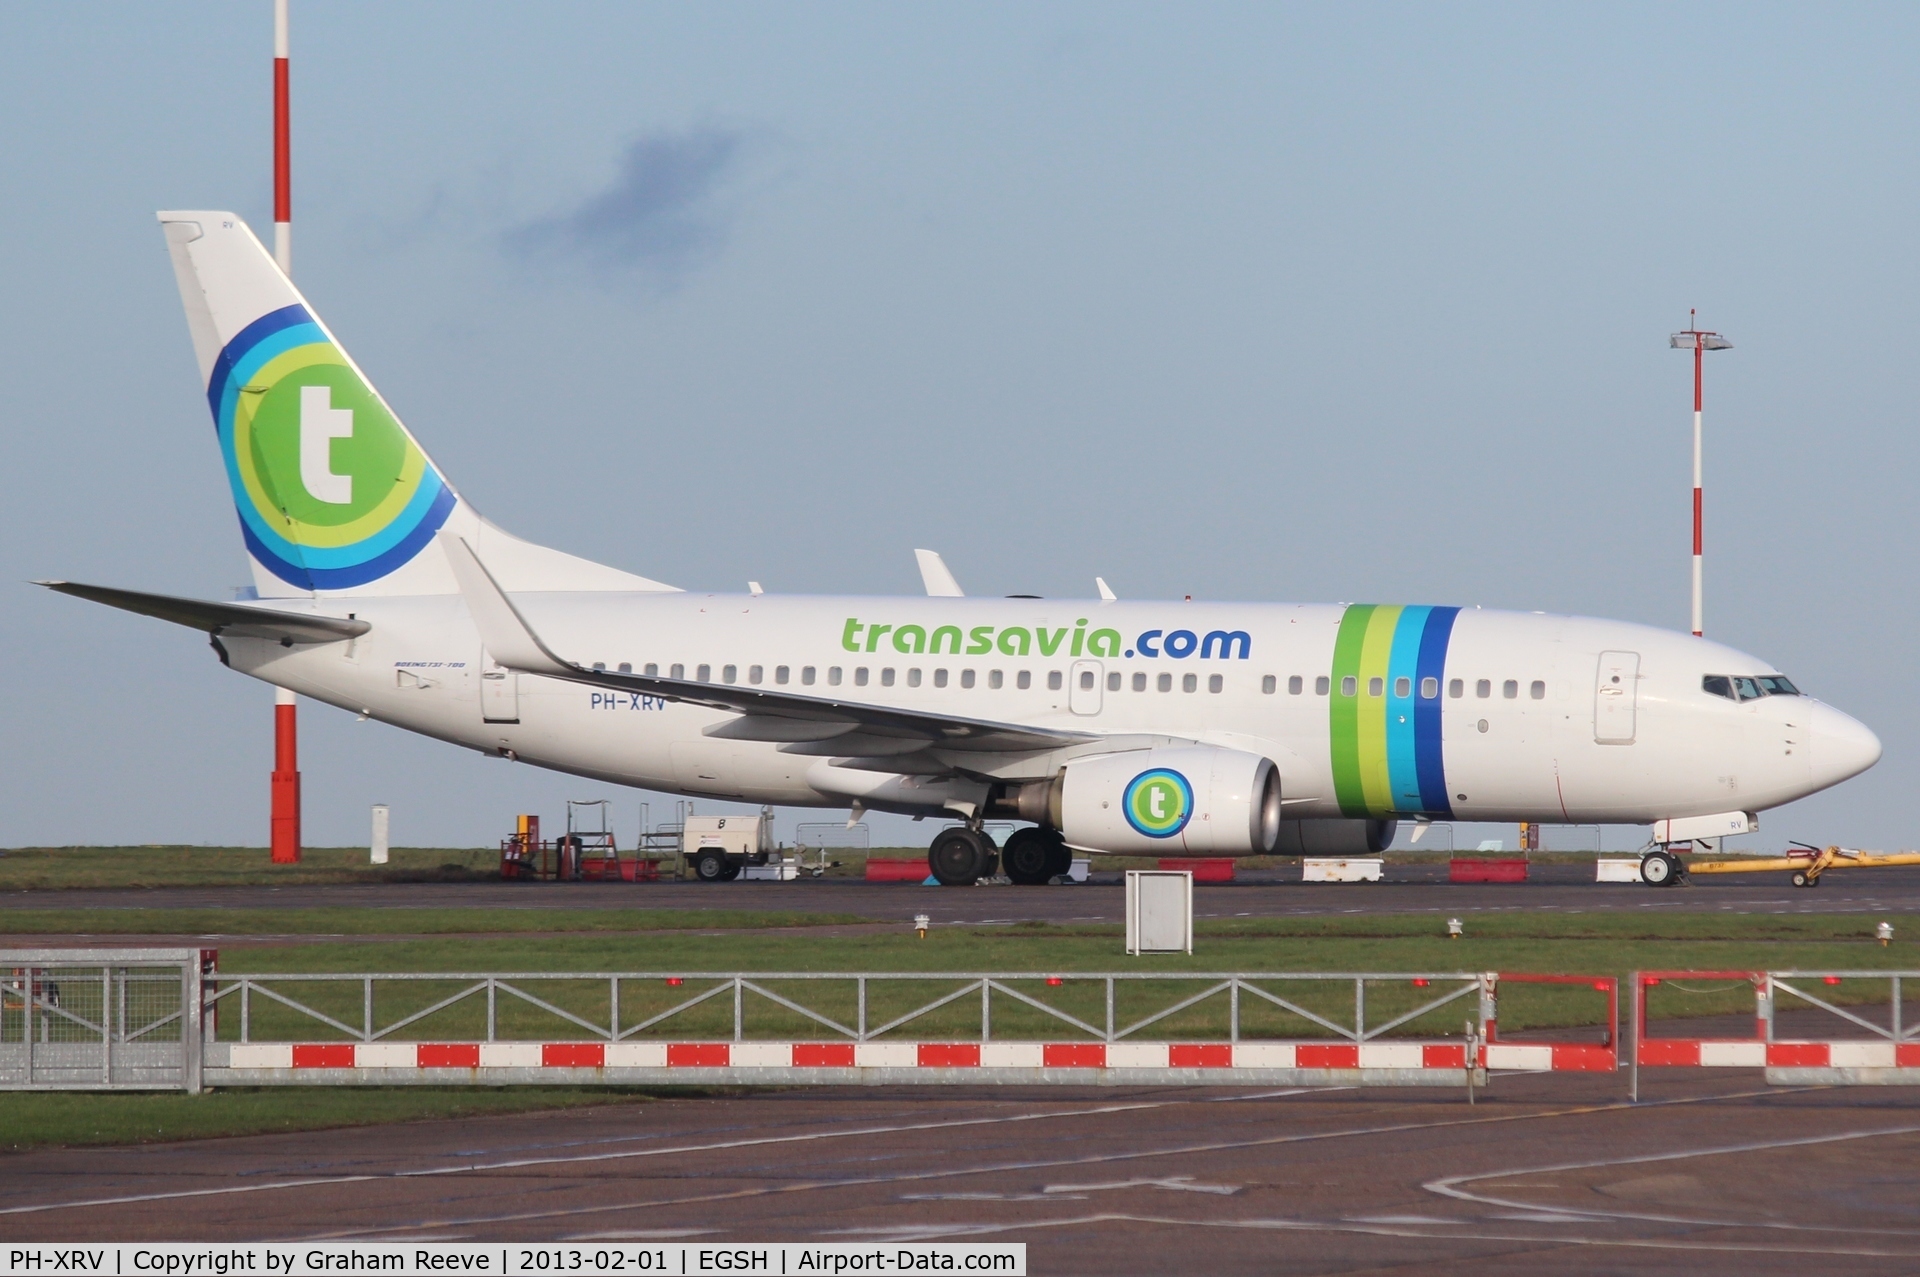 PH-XRV, 2005 Boeing 737-7K2 C/N 34170, Parked at Norwich.